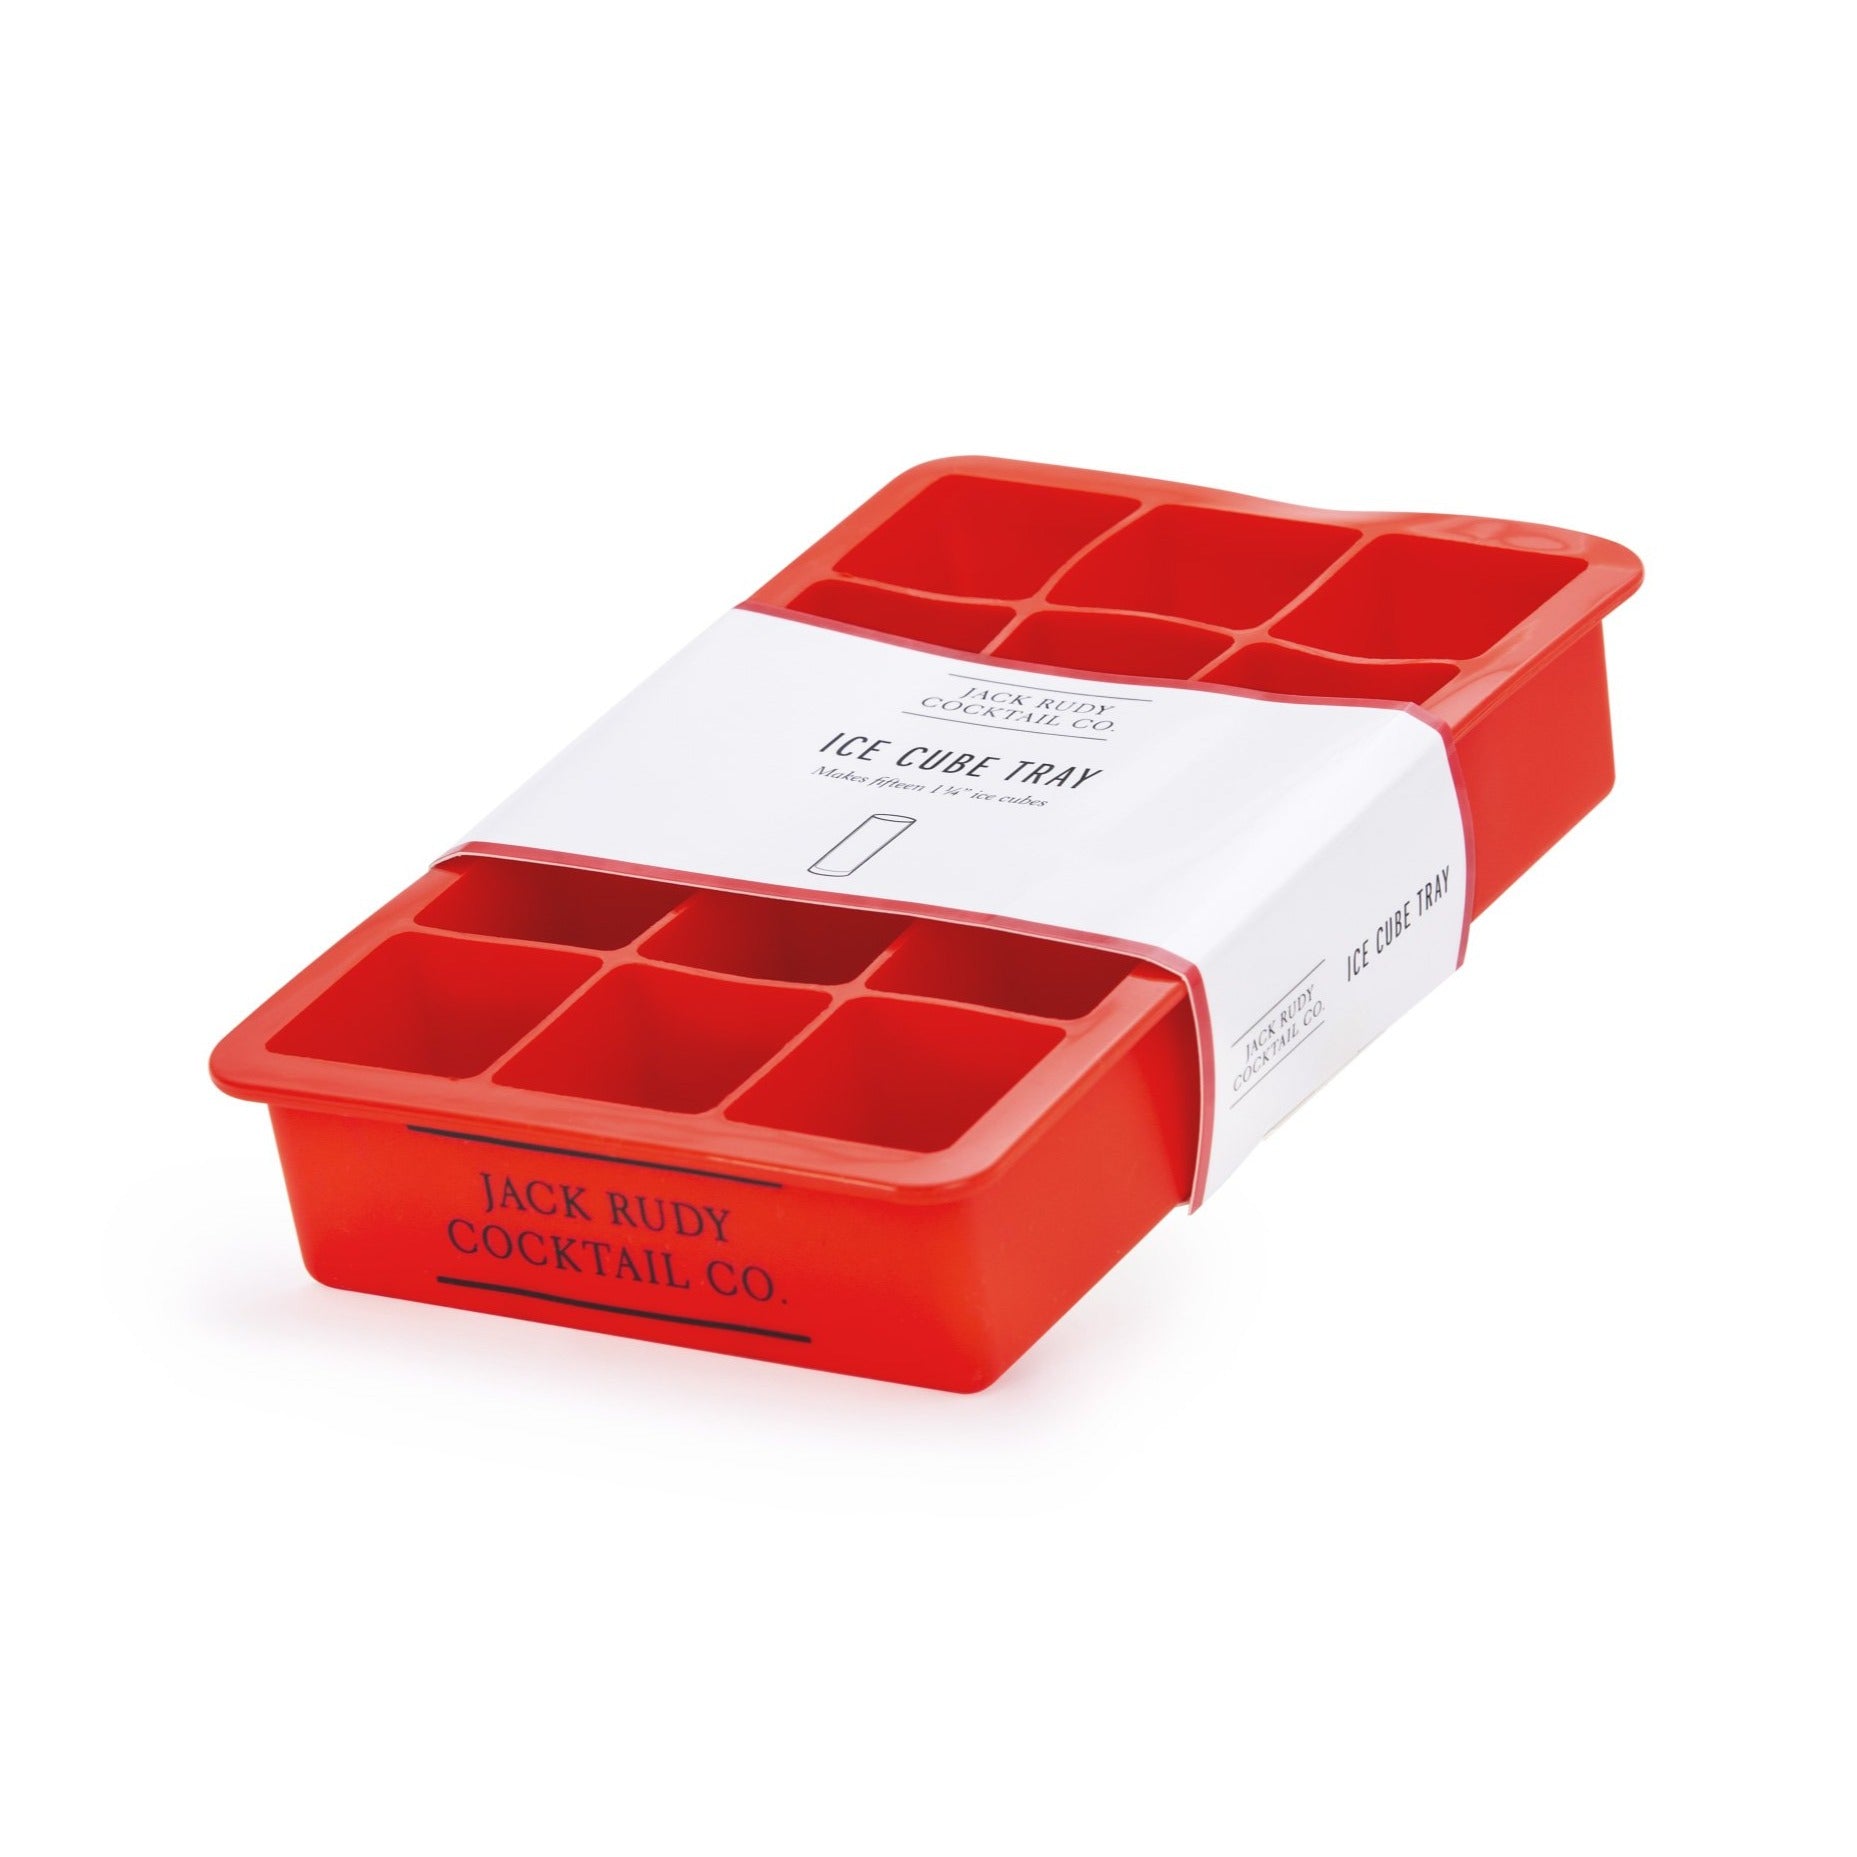 Bar Original Silicone Jumbo Ice Tray - Products and Services